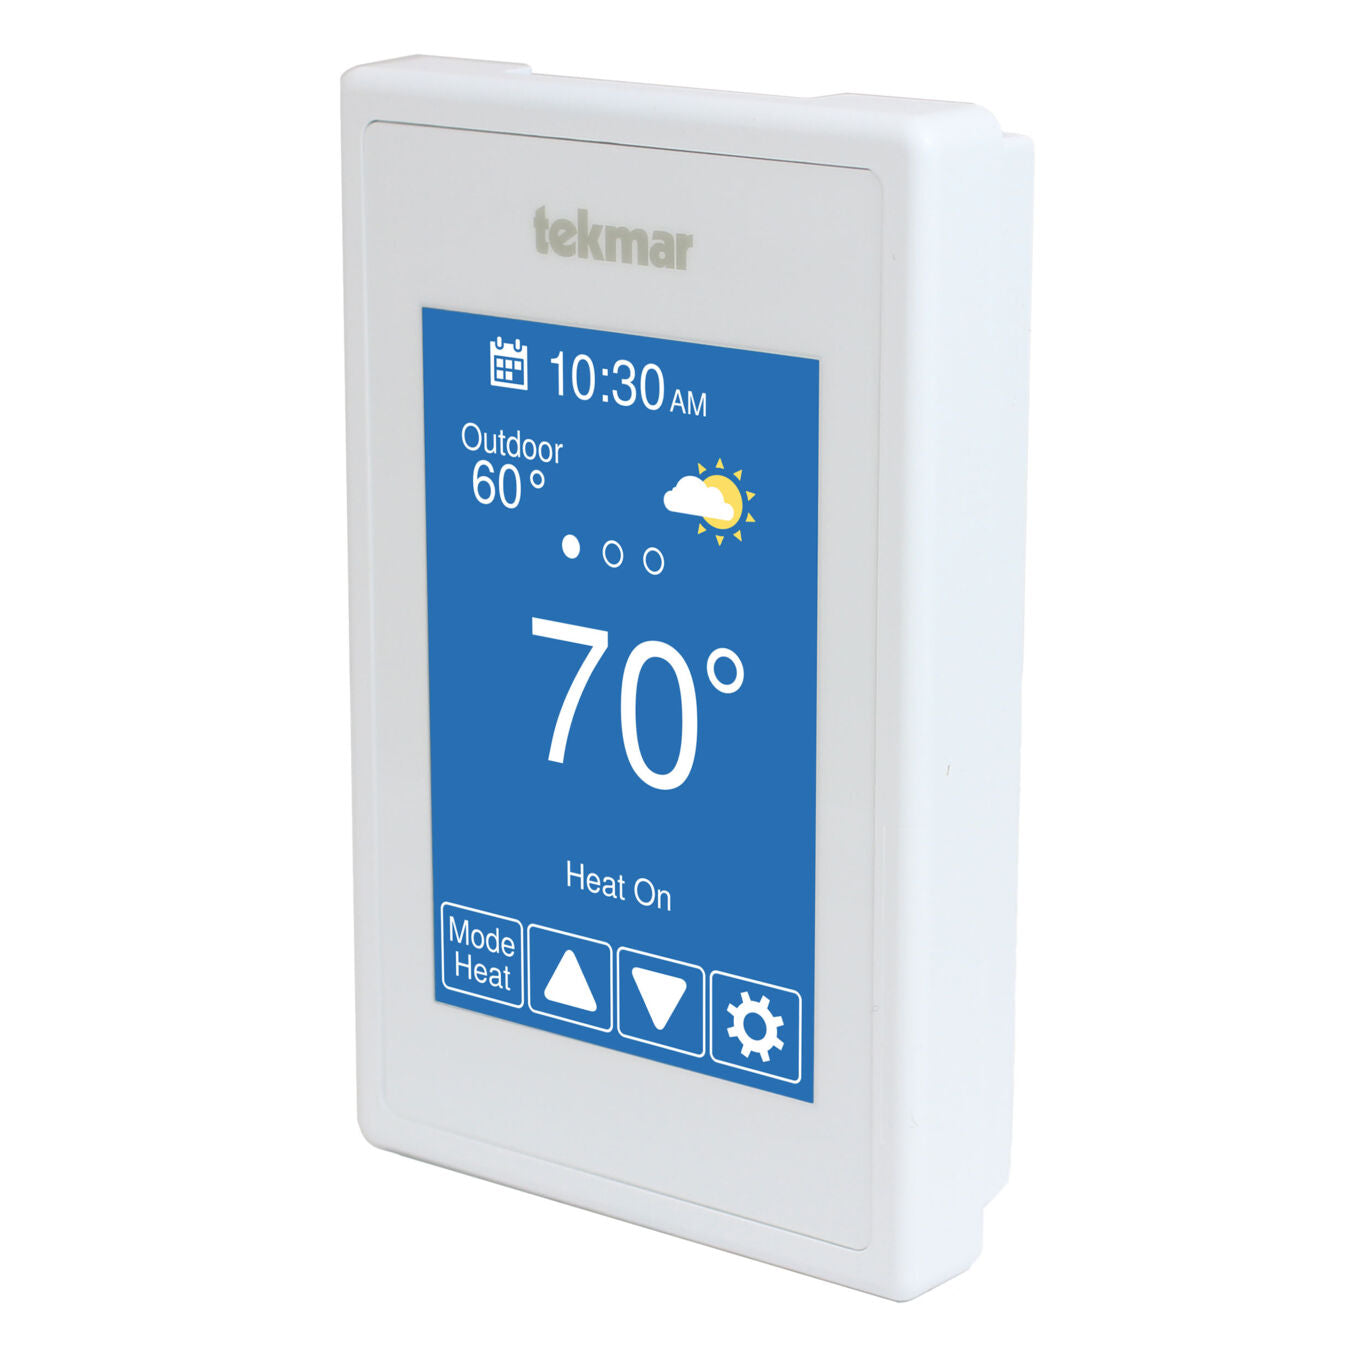 561 - WiFi Radiant Floor Heating Thermostat - One Stage Heat